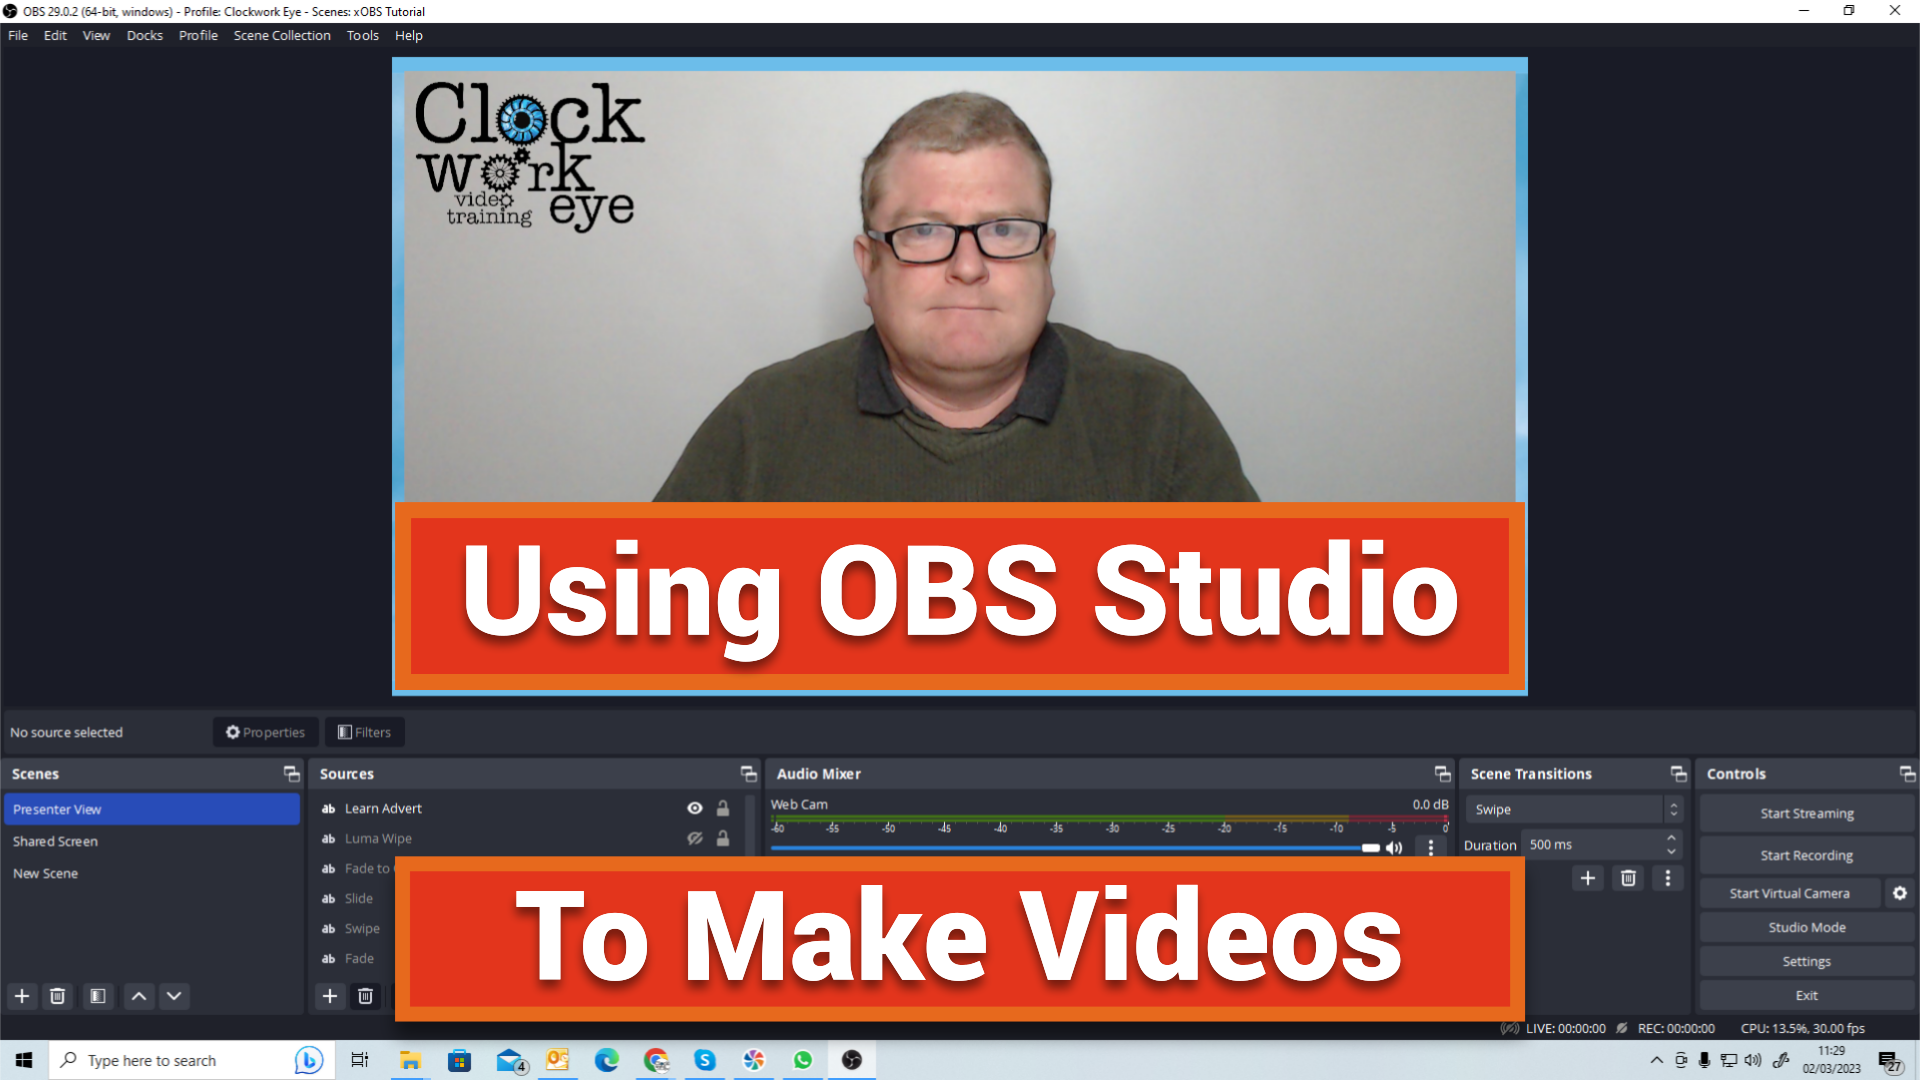 Creating Videos With OBS Studio (Interactive Workshop)